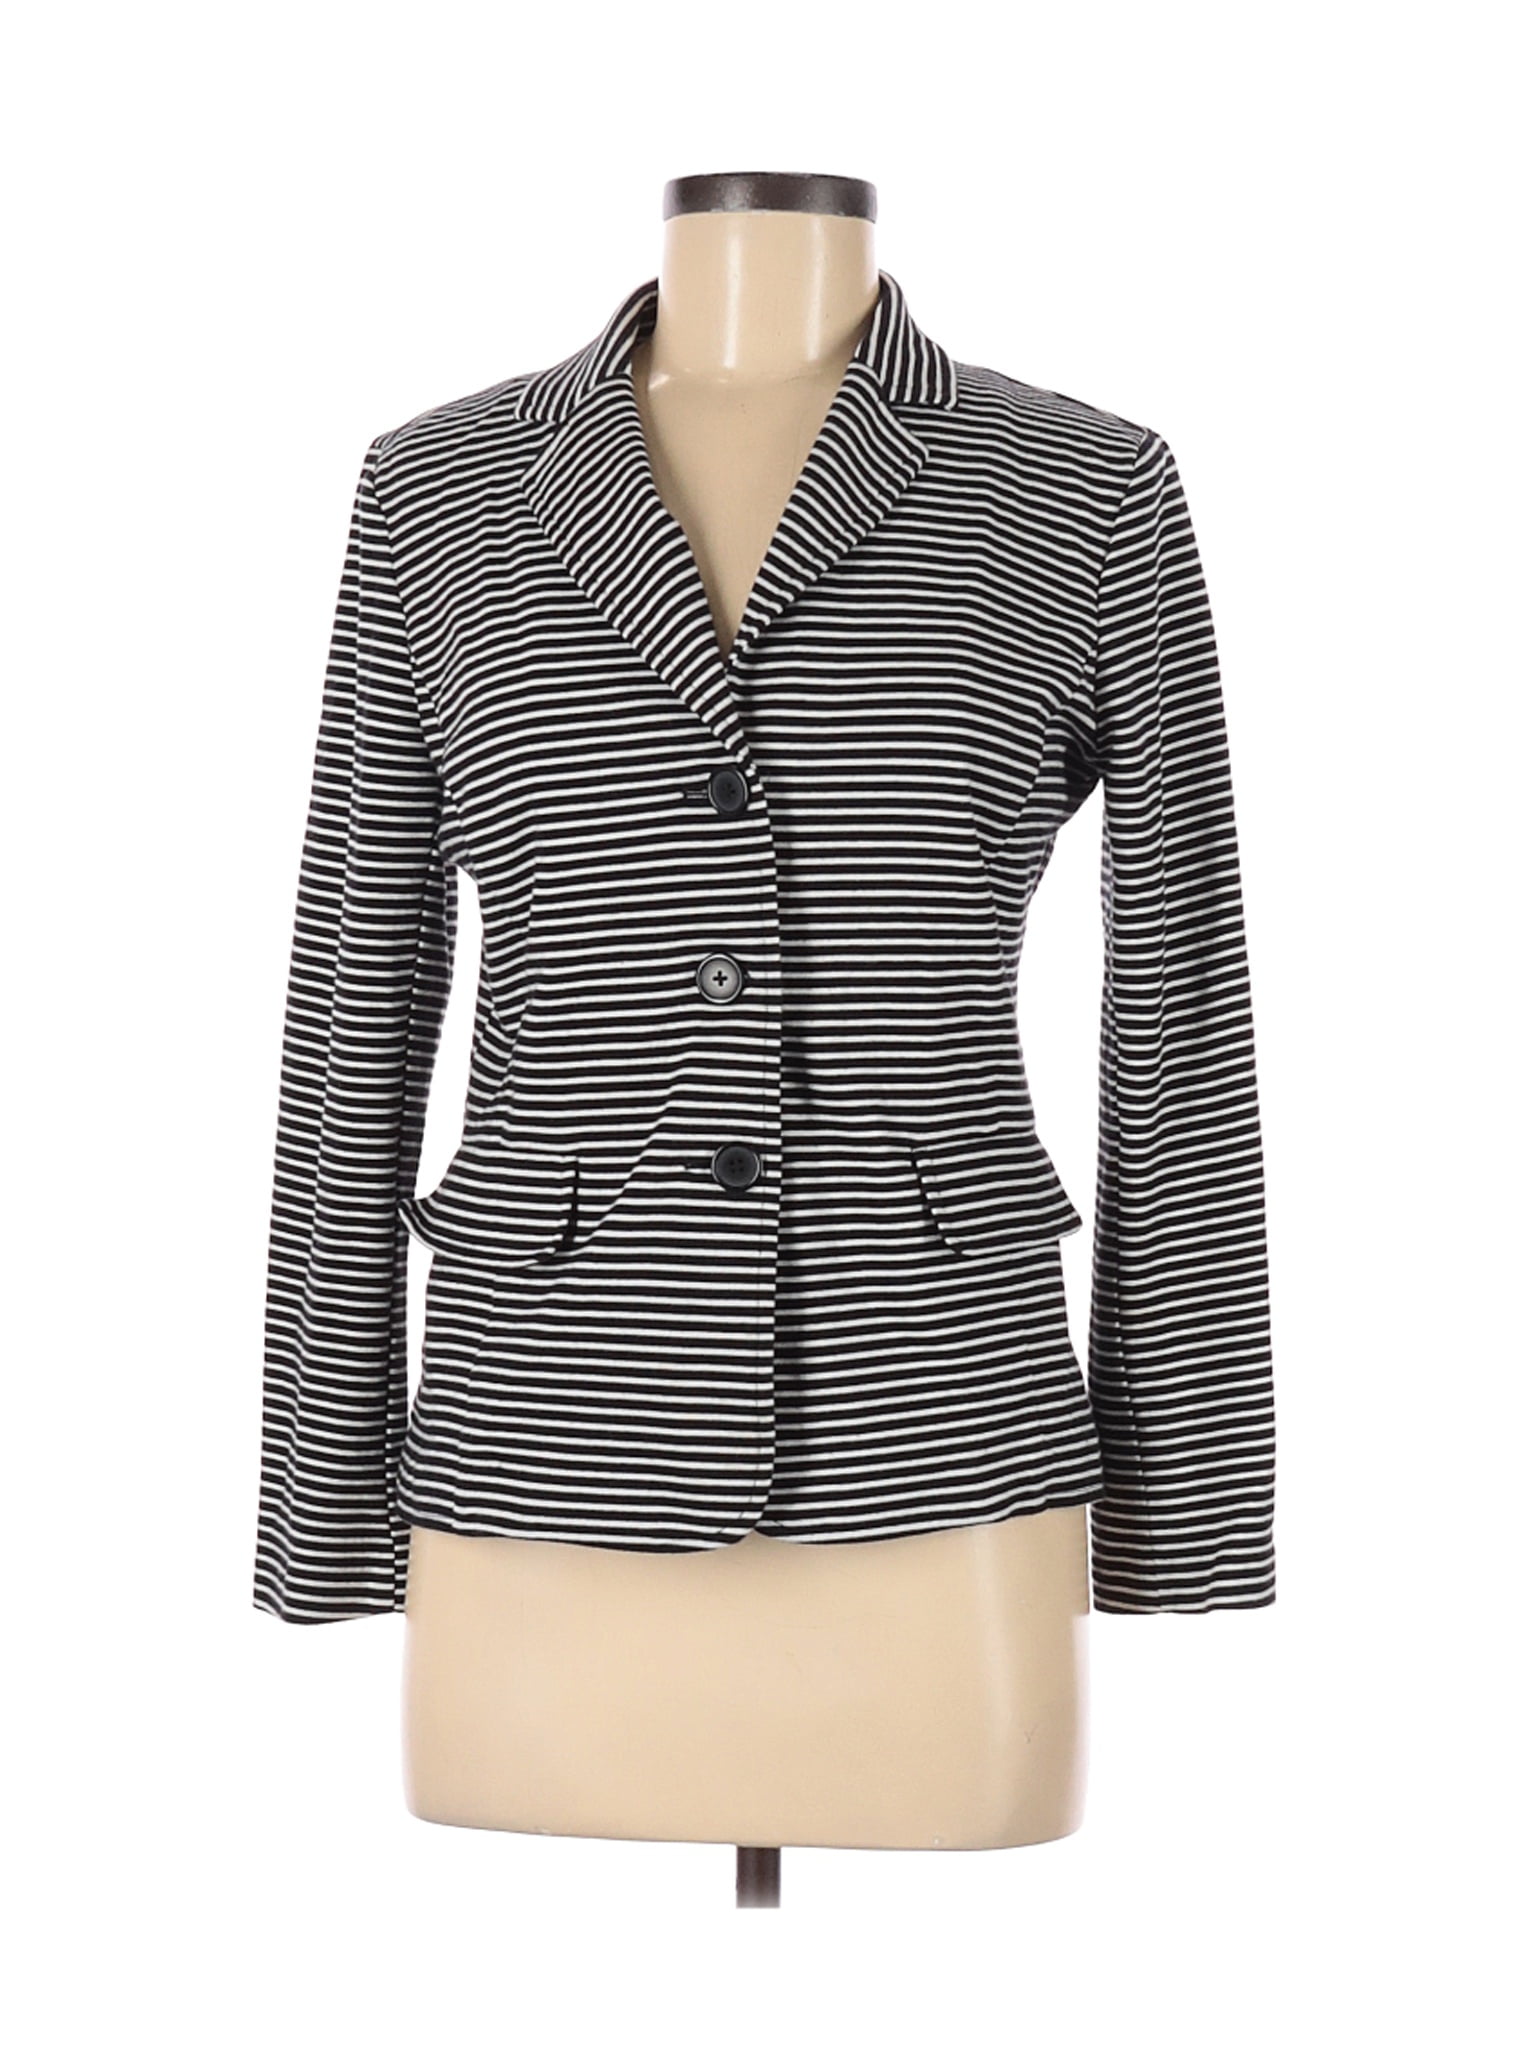 Talbots Outlet - Pre-Owned Talbots Outlet Women's Size M Blazer ...